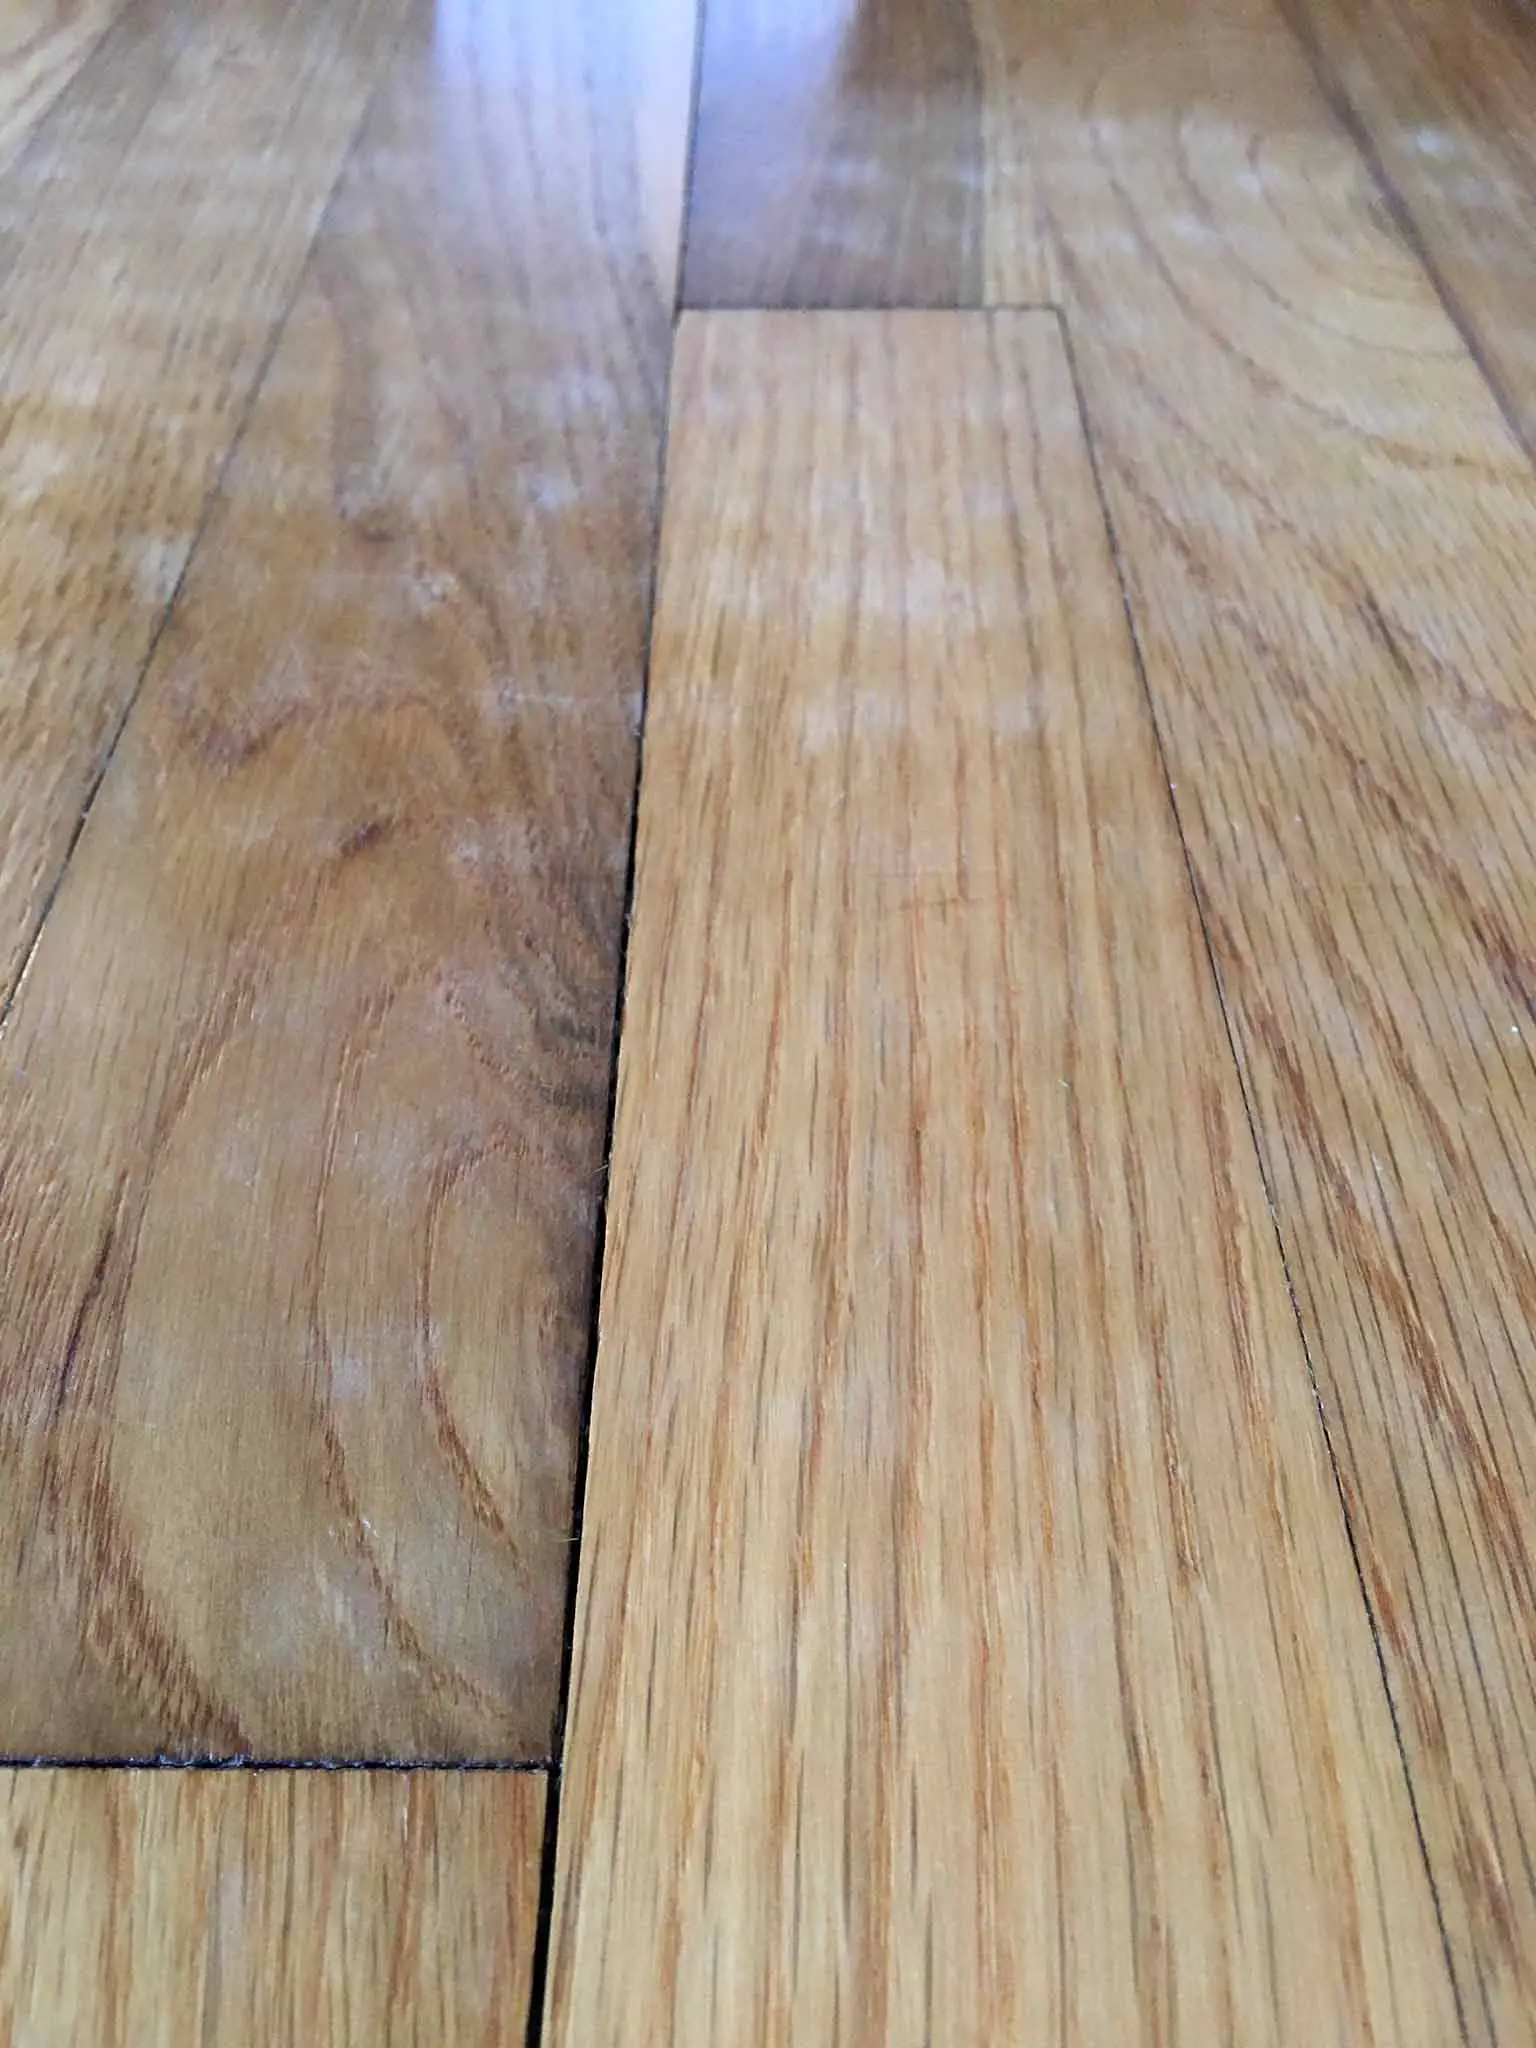 How I Wrecked My Hardwood Floors And, Natural Rug Pads For Hardwood Floors